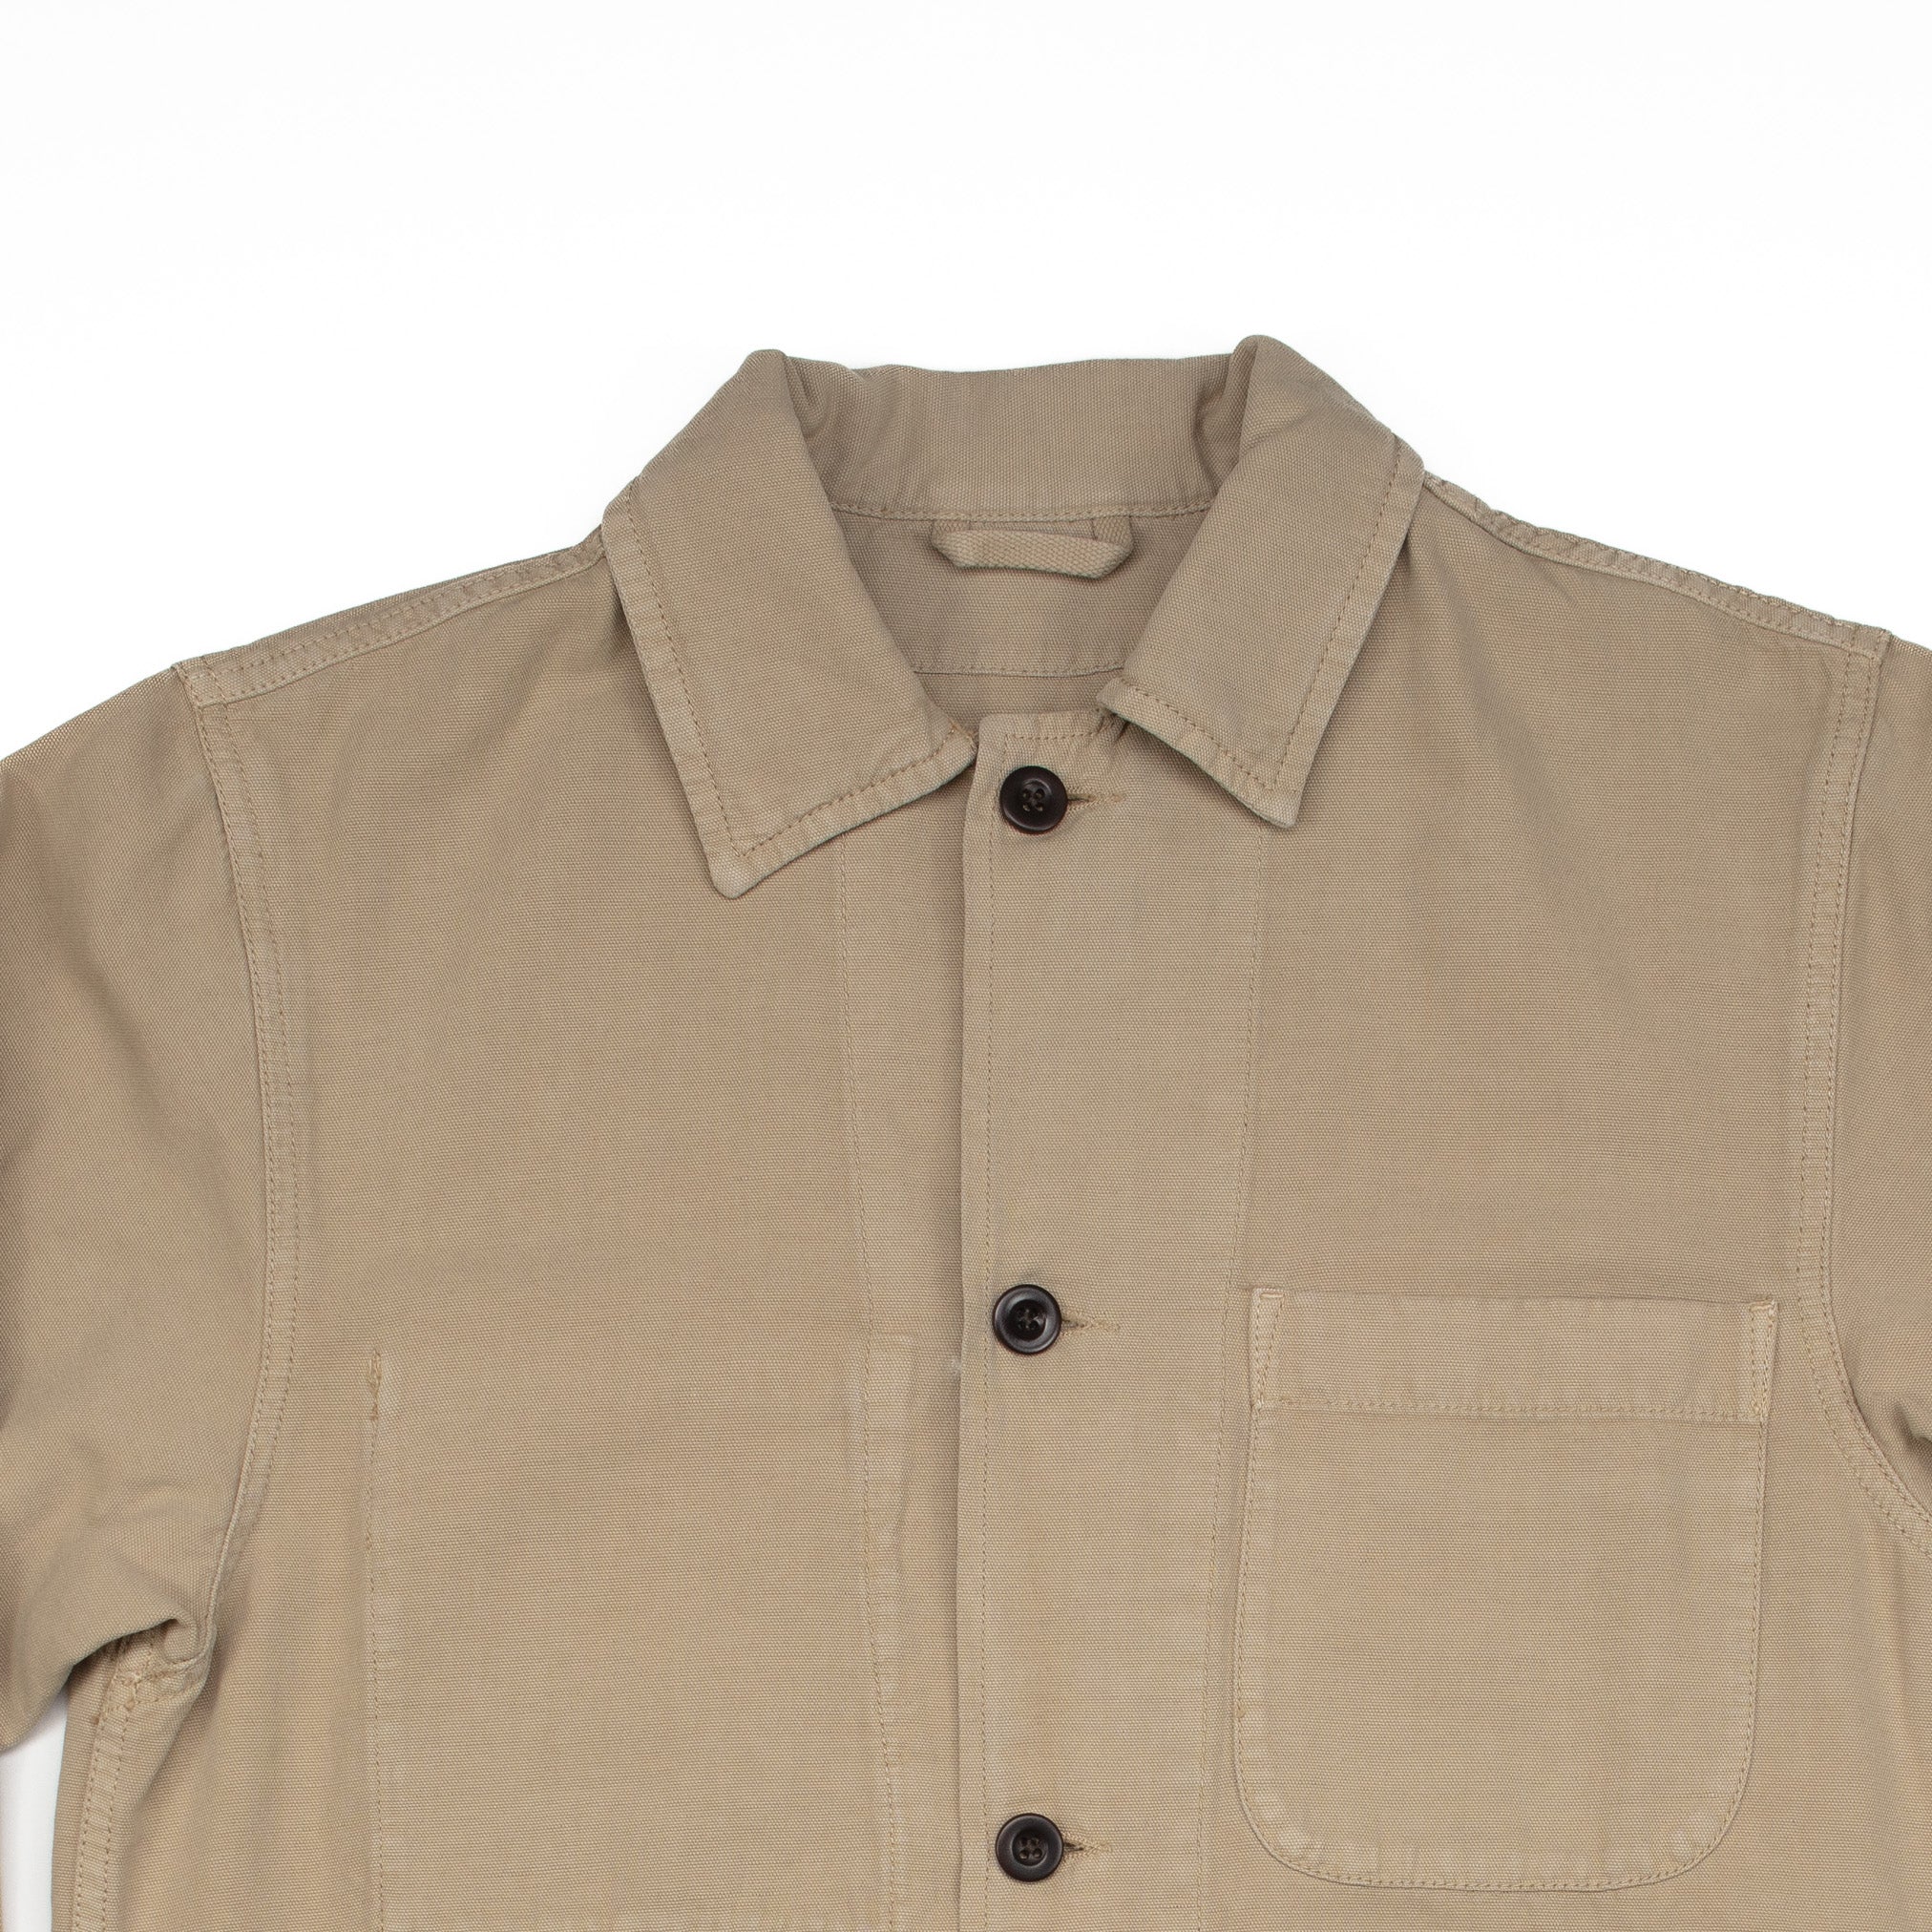 St Malo Work Jacket in Sand